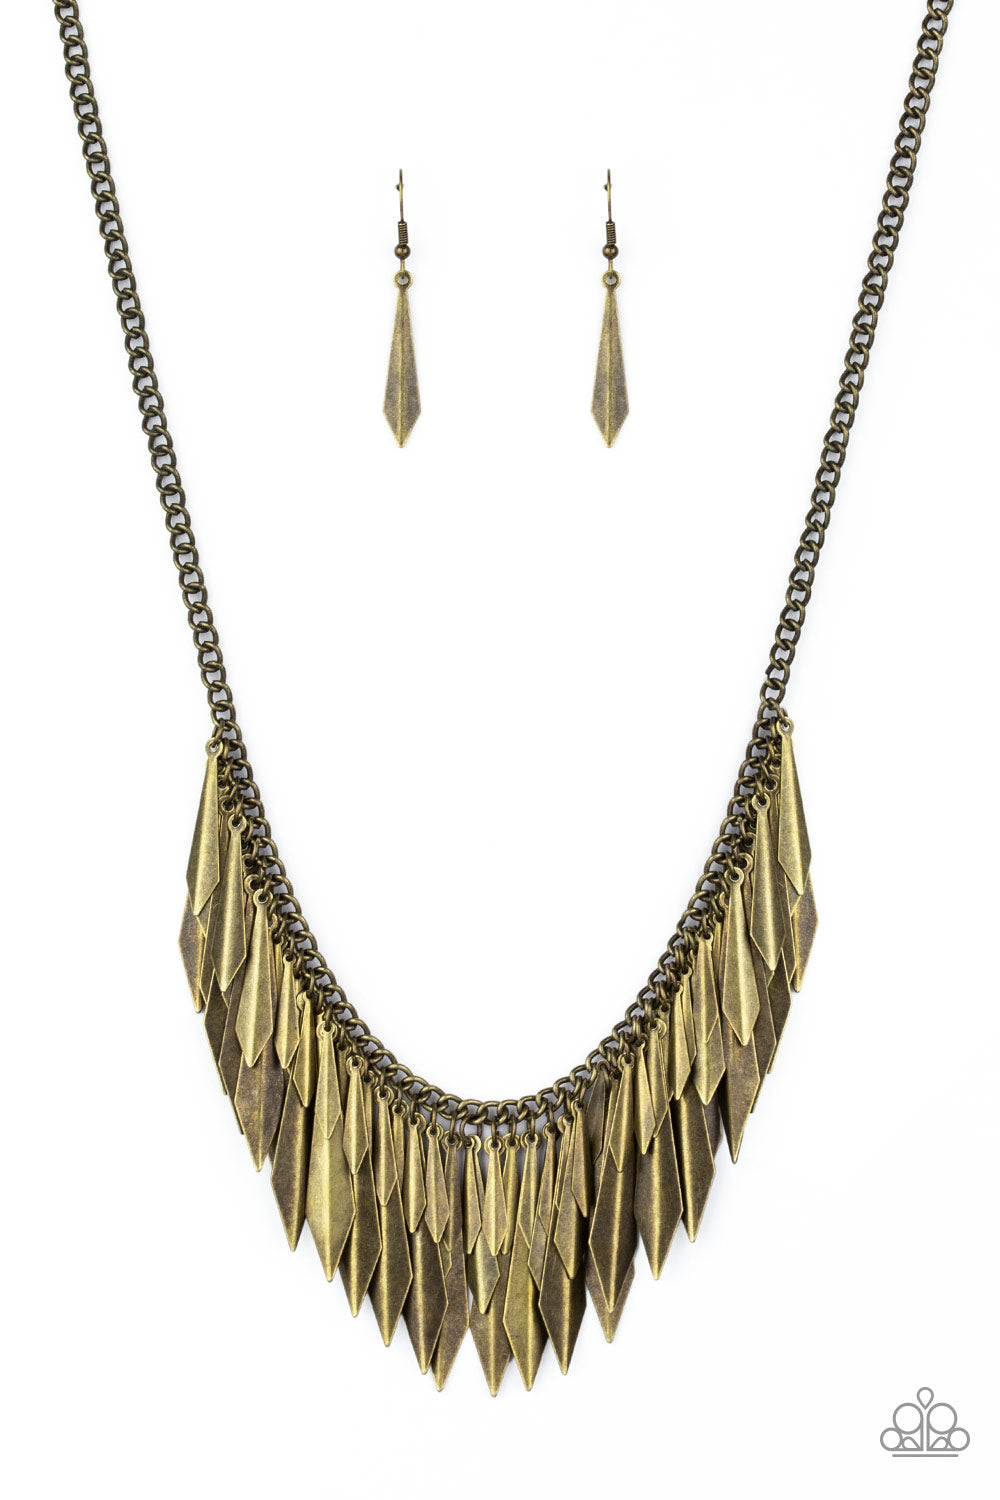 Paparazzi necklace - The Thrill-Seeker - Brass